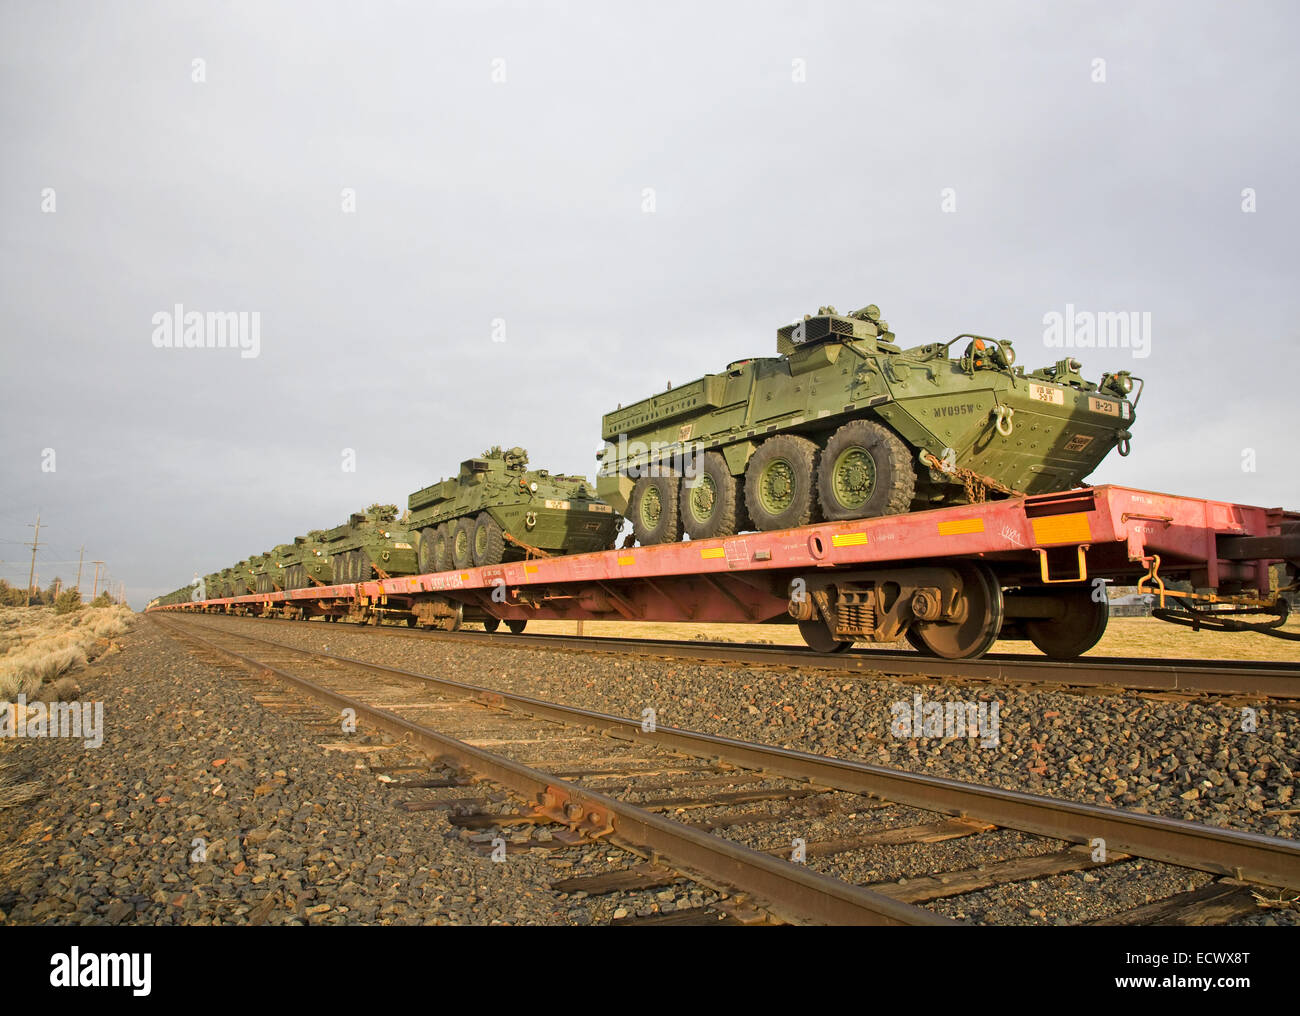 Army personnel carriers and other army vehicles aboard a freight train going south through central Oregon. Stock Photo